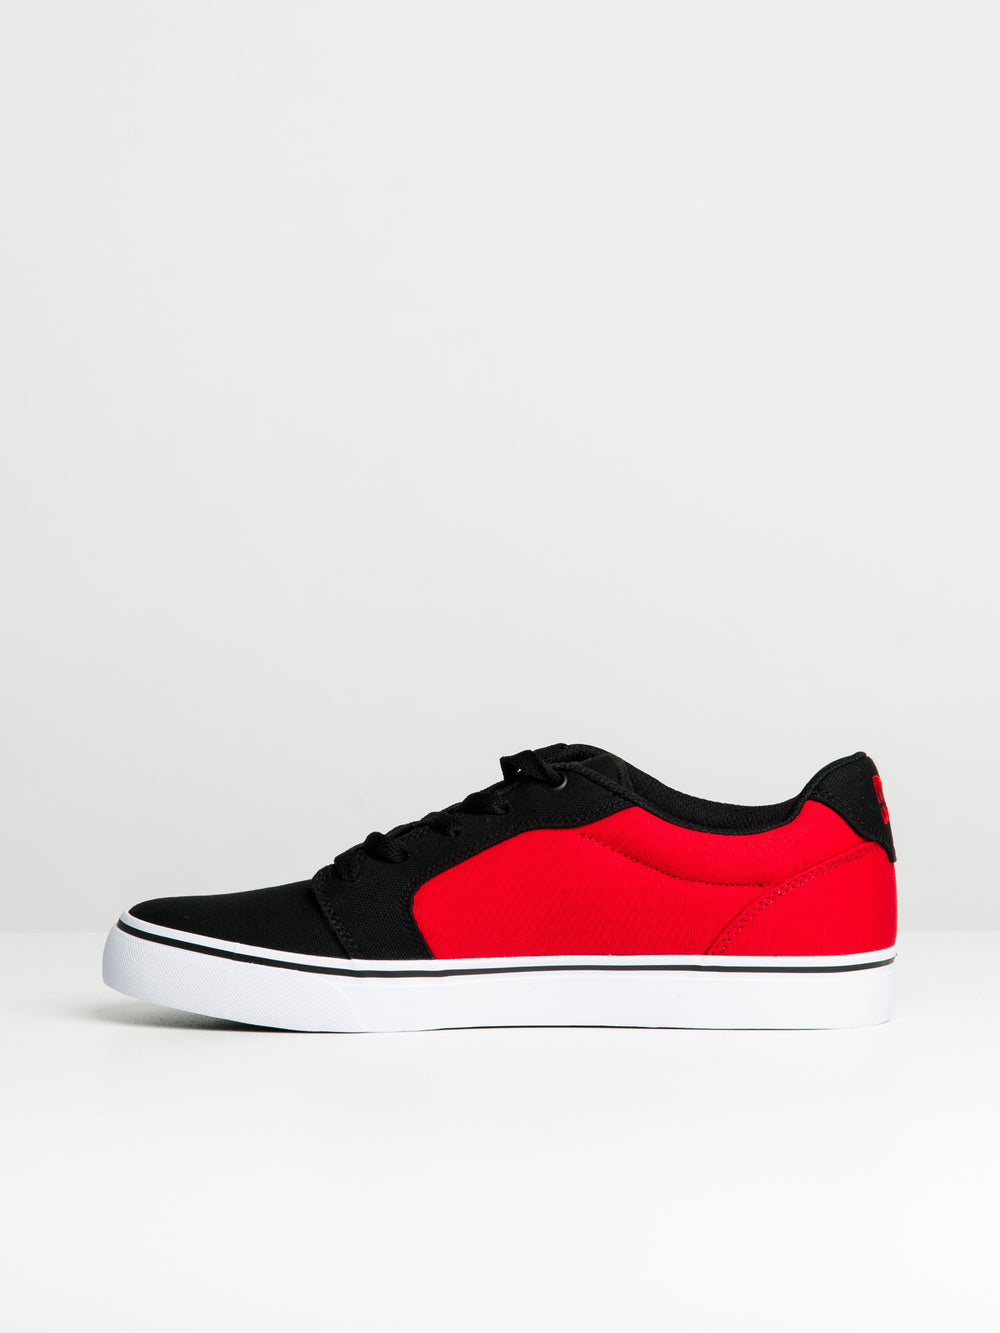 MENS DC SHOES ANVIL SNEAKER - CLEARANCE